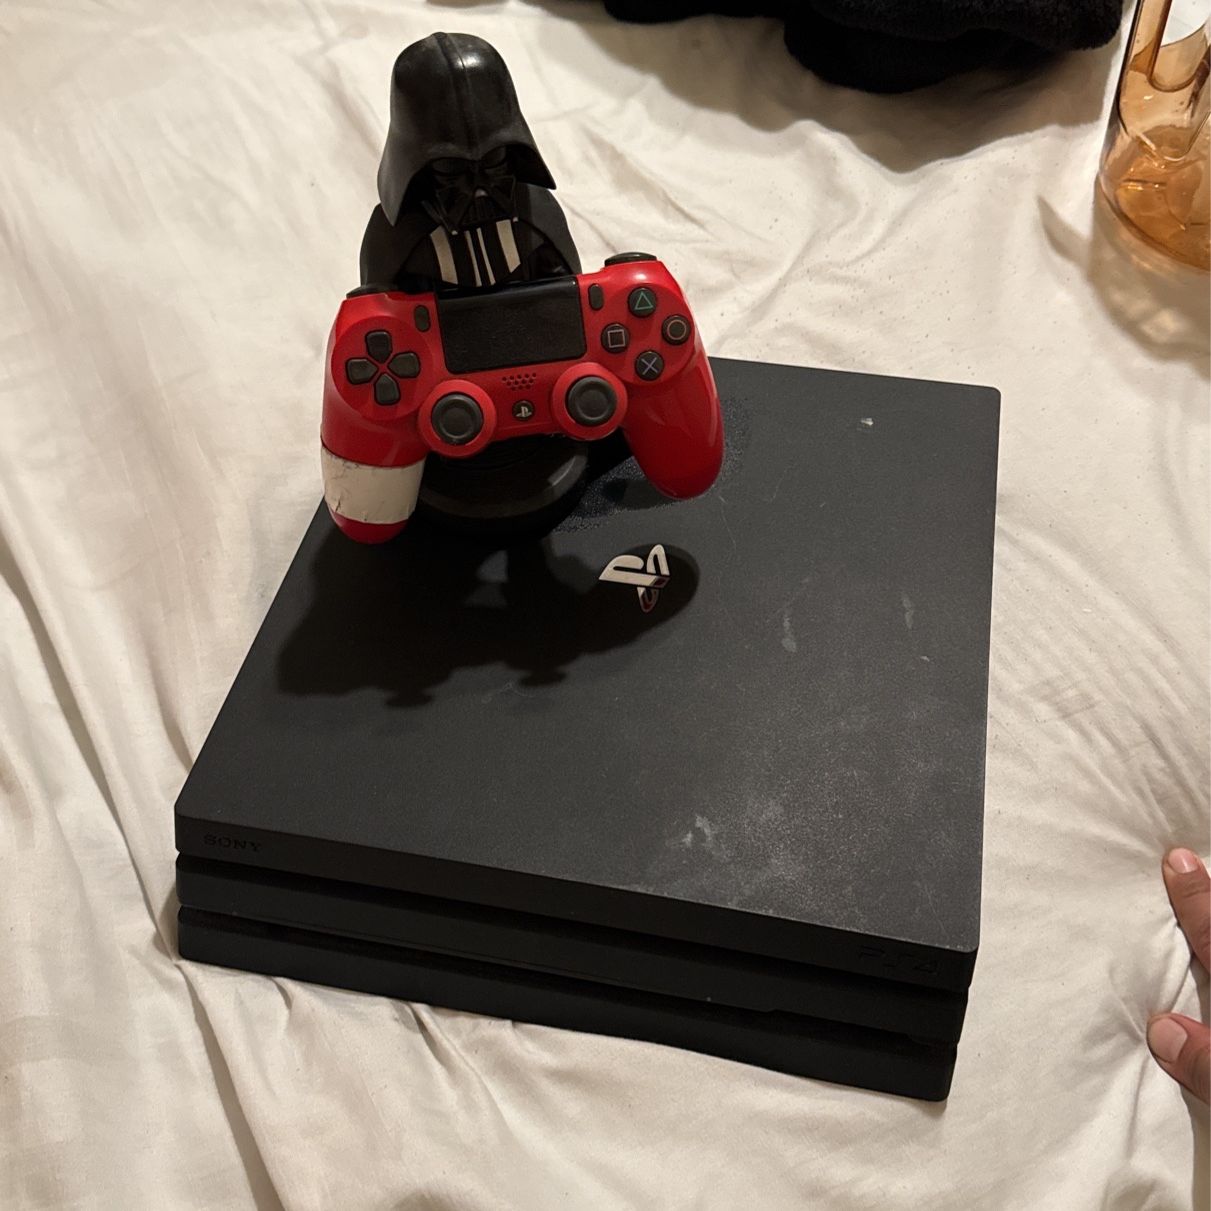 PS4 Pro 1tb + Controller $160 OBO Shoot Offers